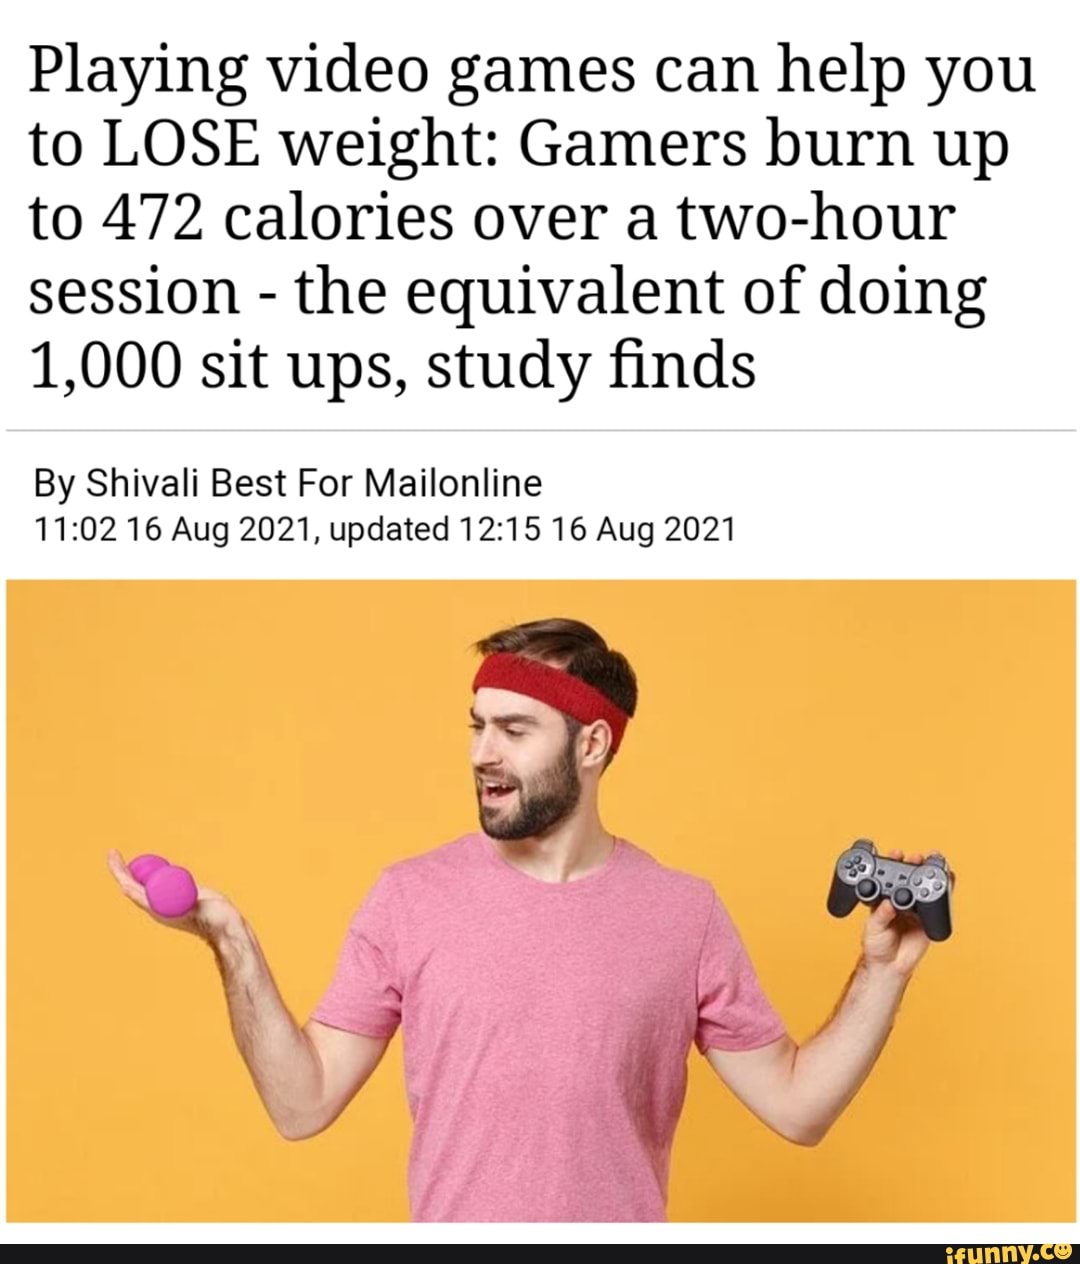 How Many Calories Are Burned Playing Video Games?